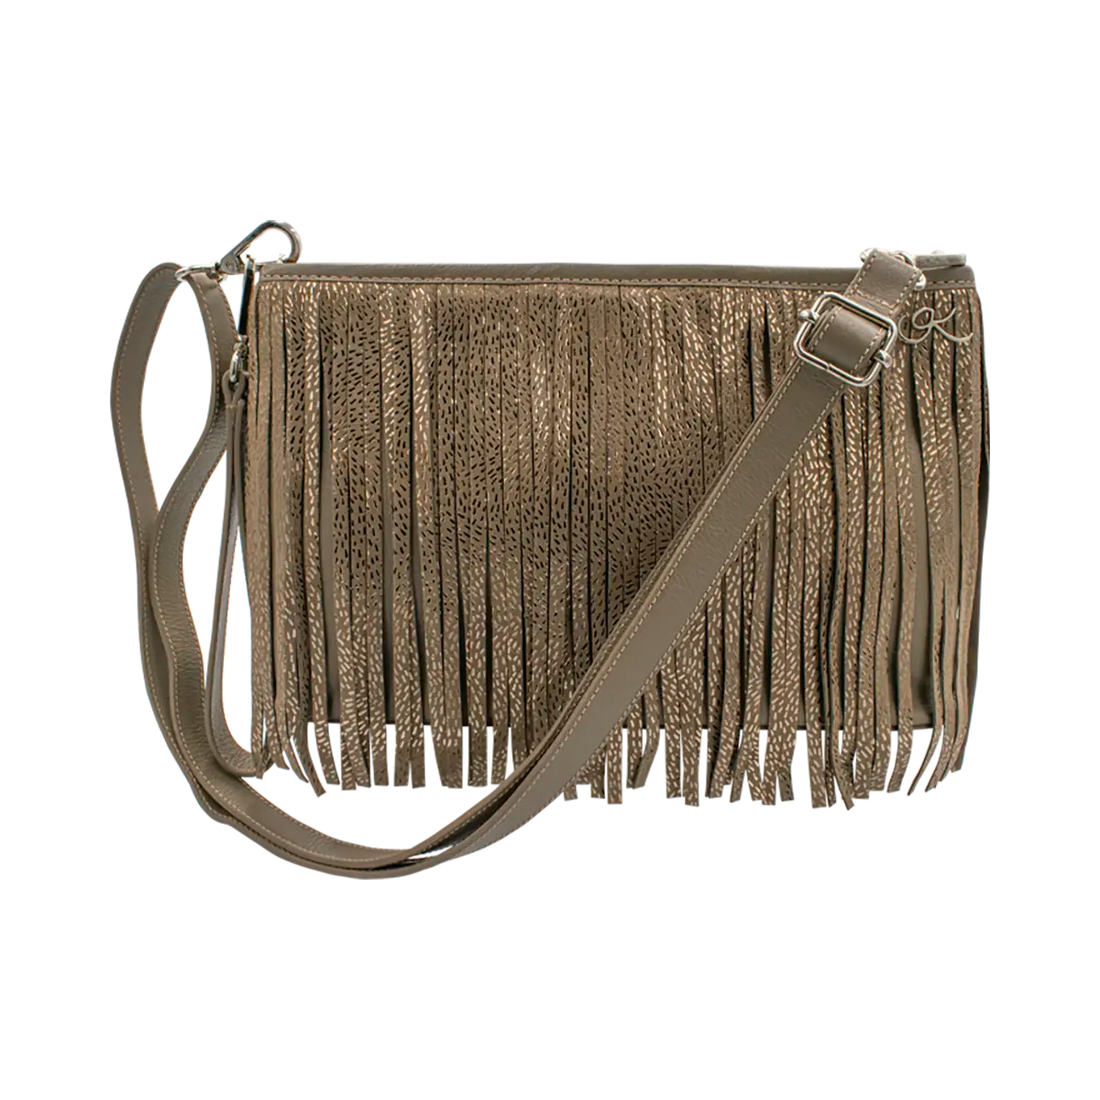 tan stripe small black leather crossbody bag with fringe. Fashion accessory for women in San Diego, CA.